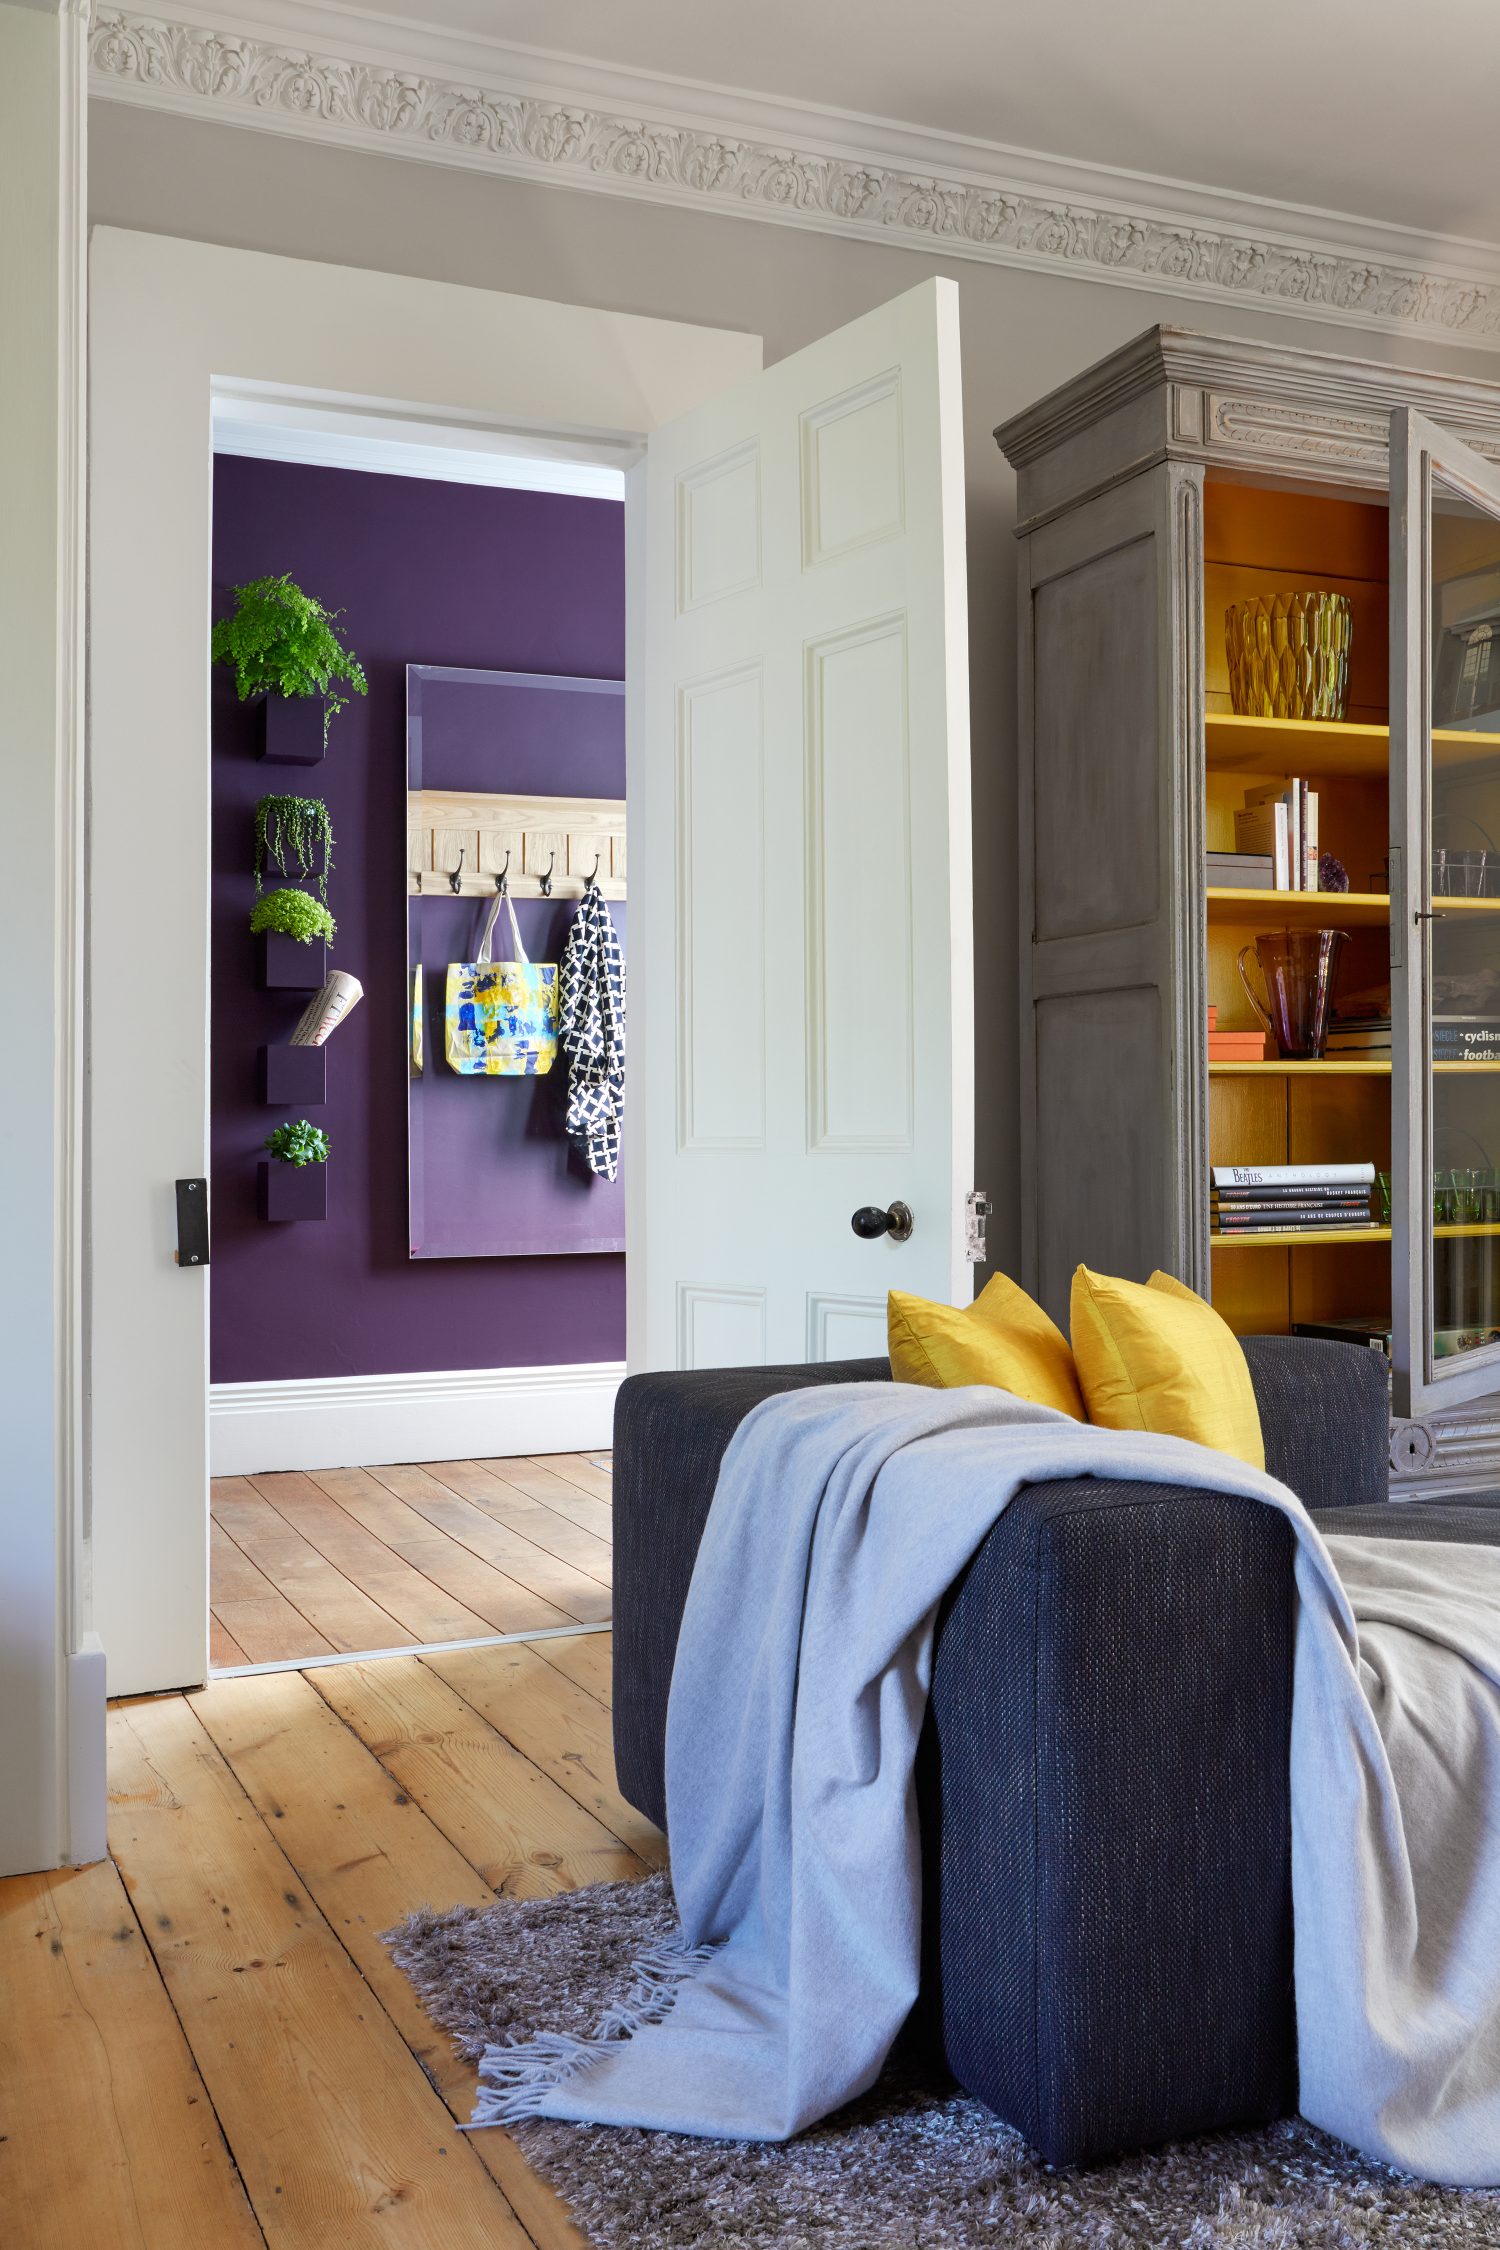 Happy House by Daniel Hopwood – antique armoire and bright yellow interior. Eclectic design